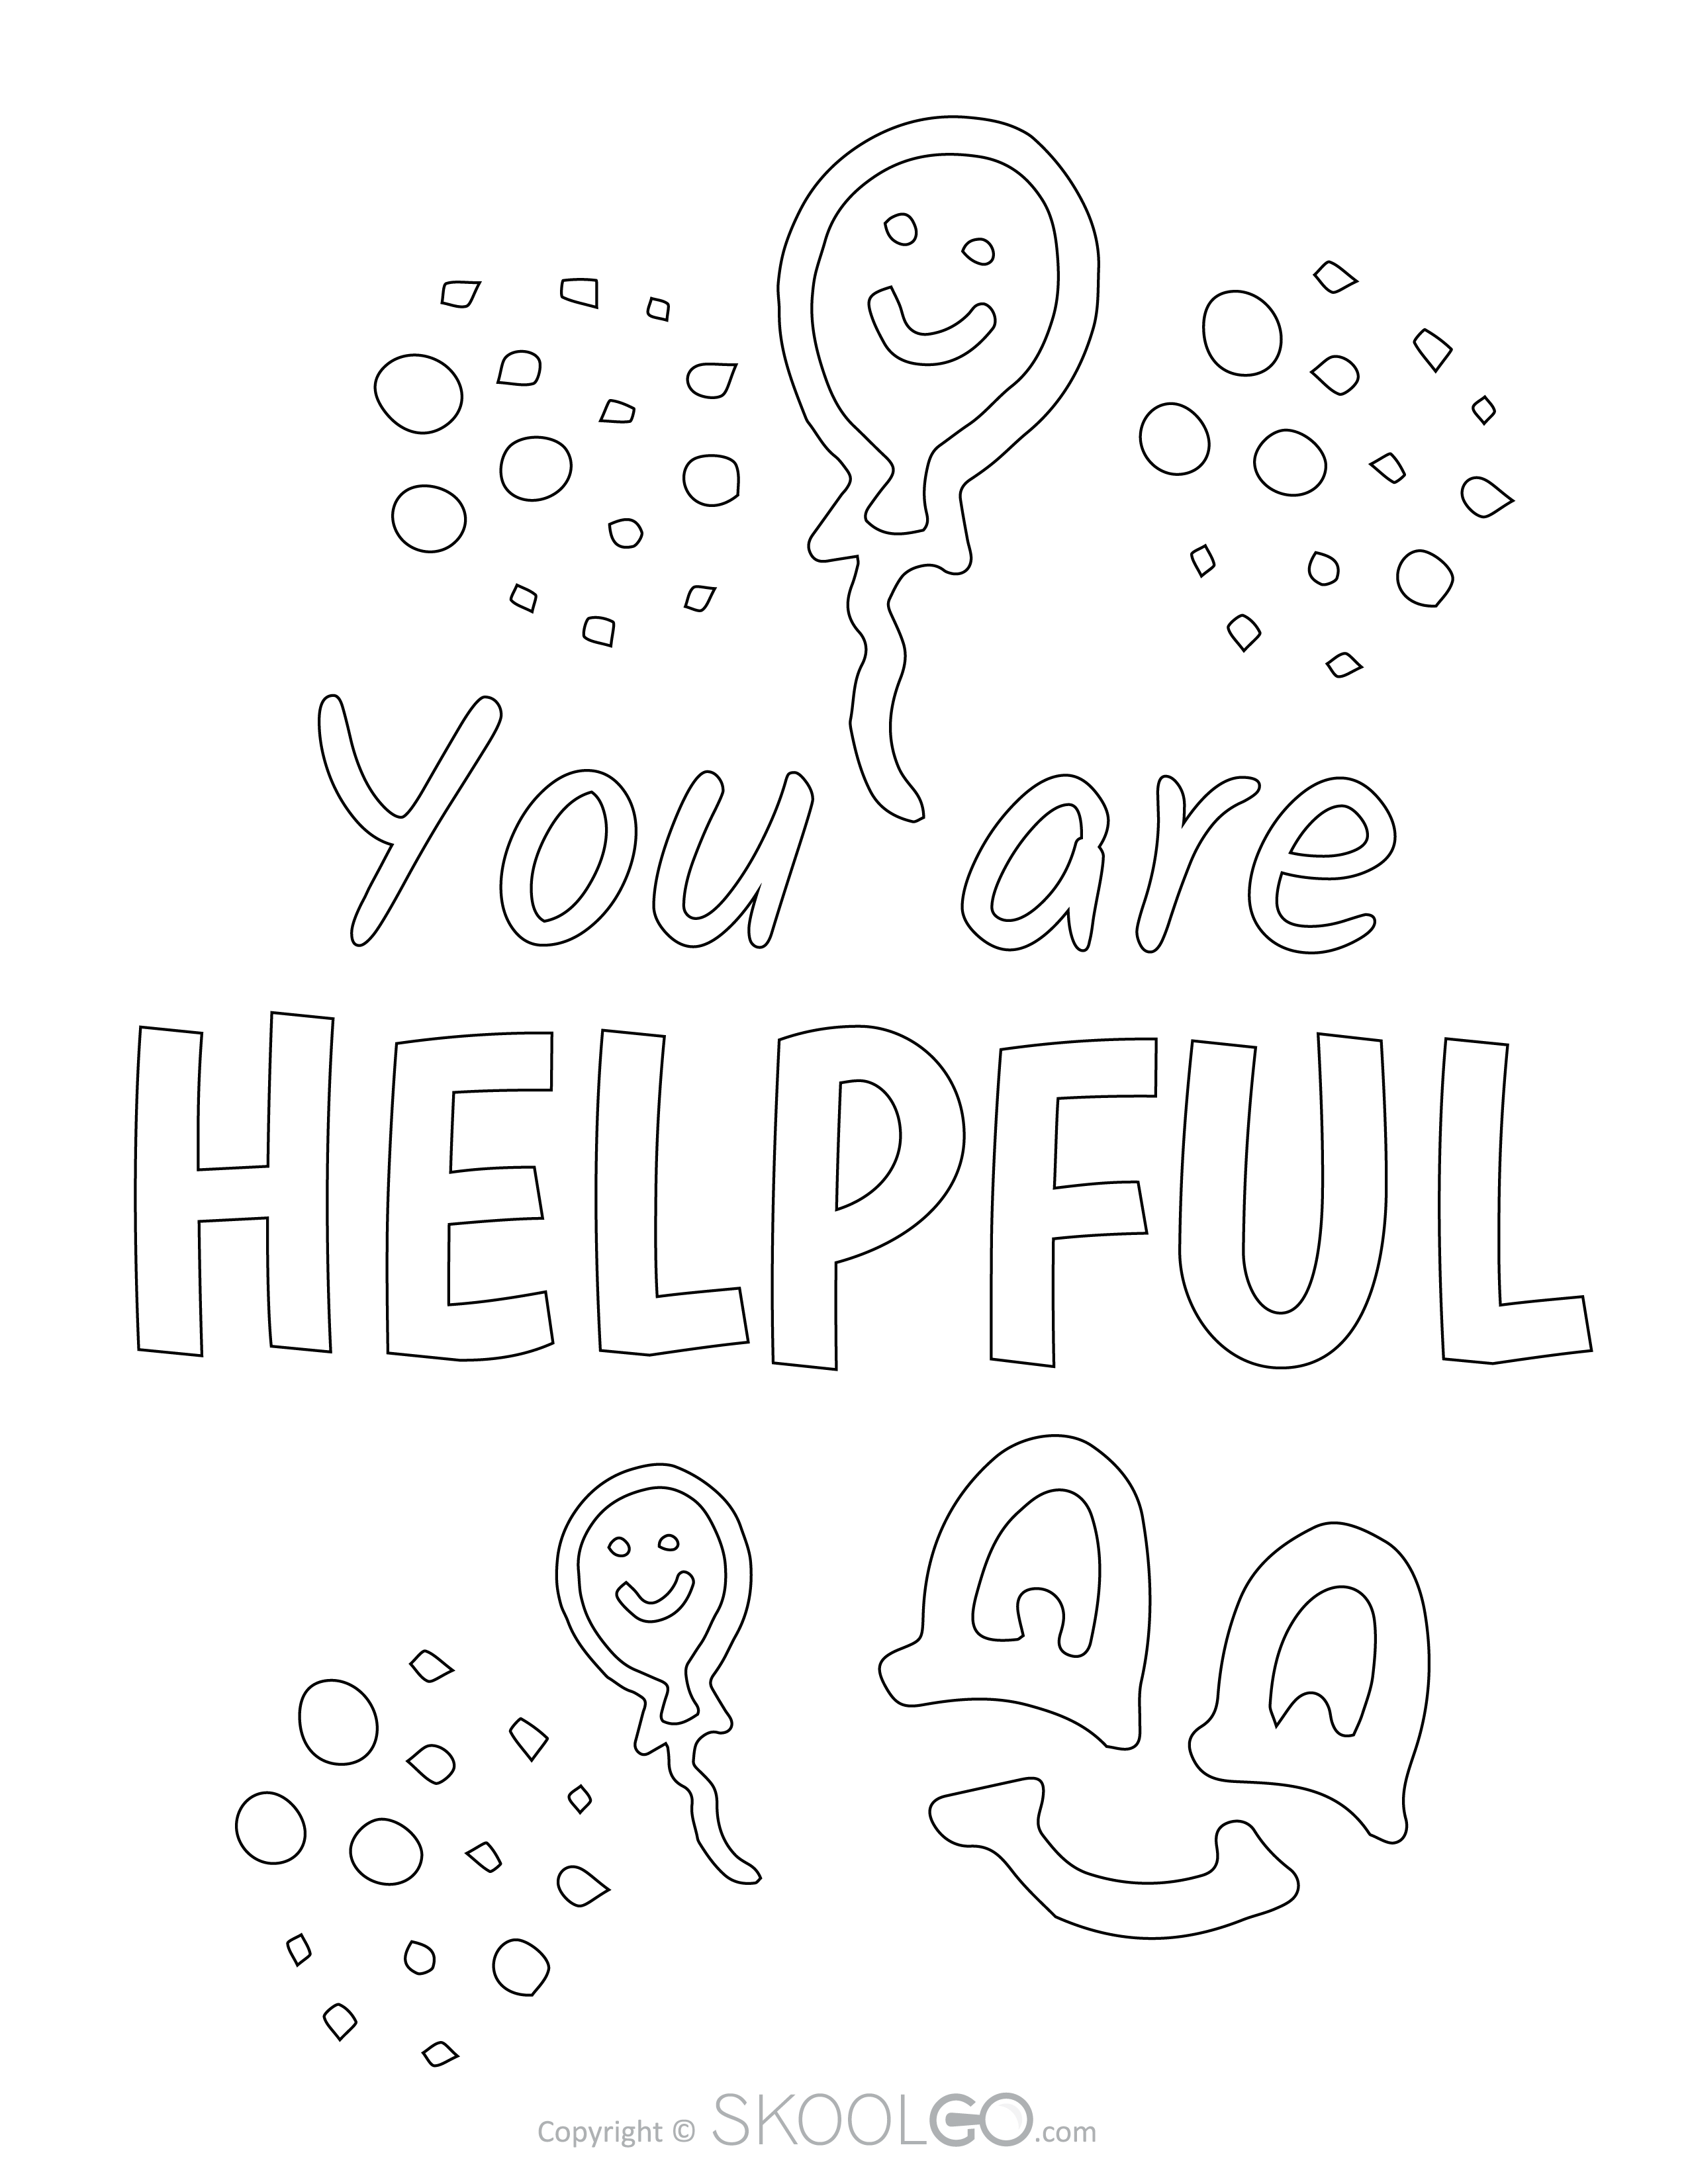 You Are Helpful - Free Coloring Version Poster